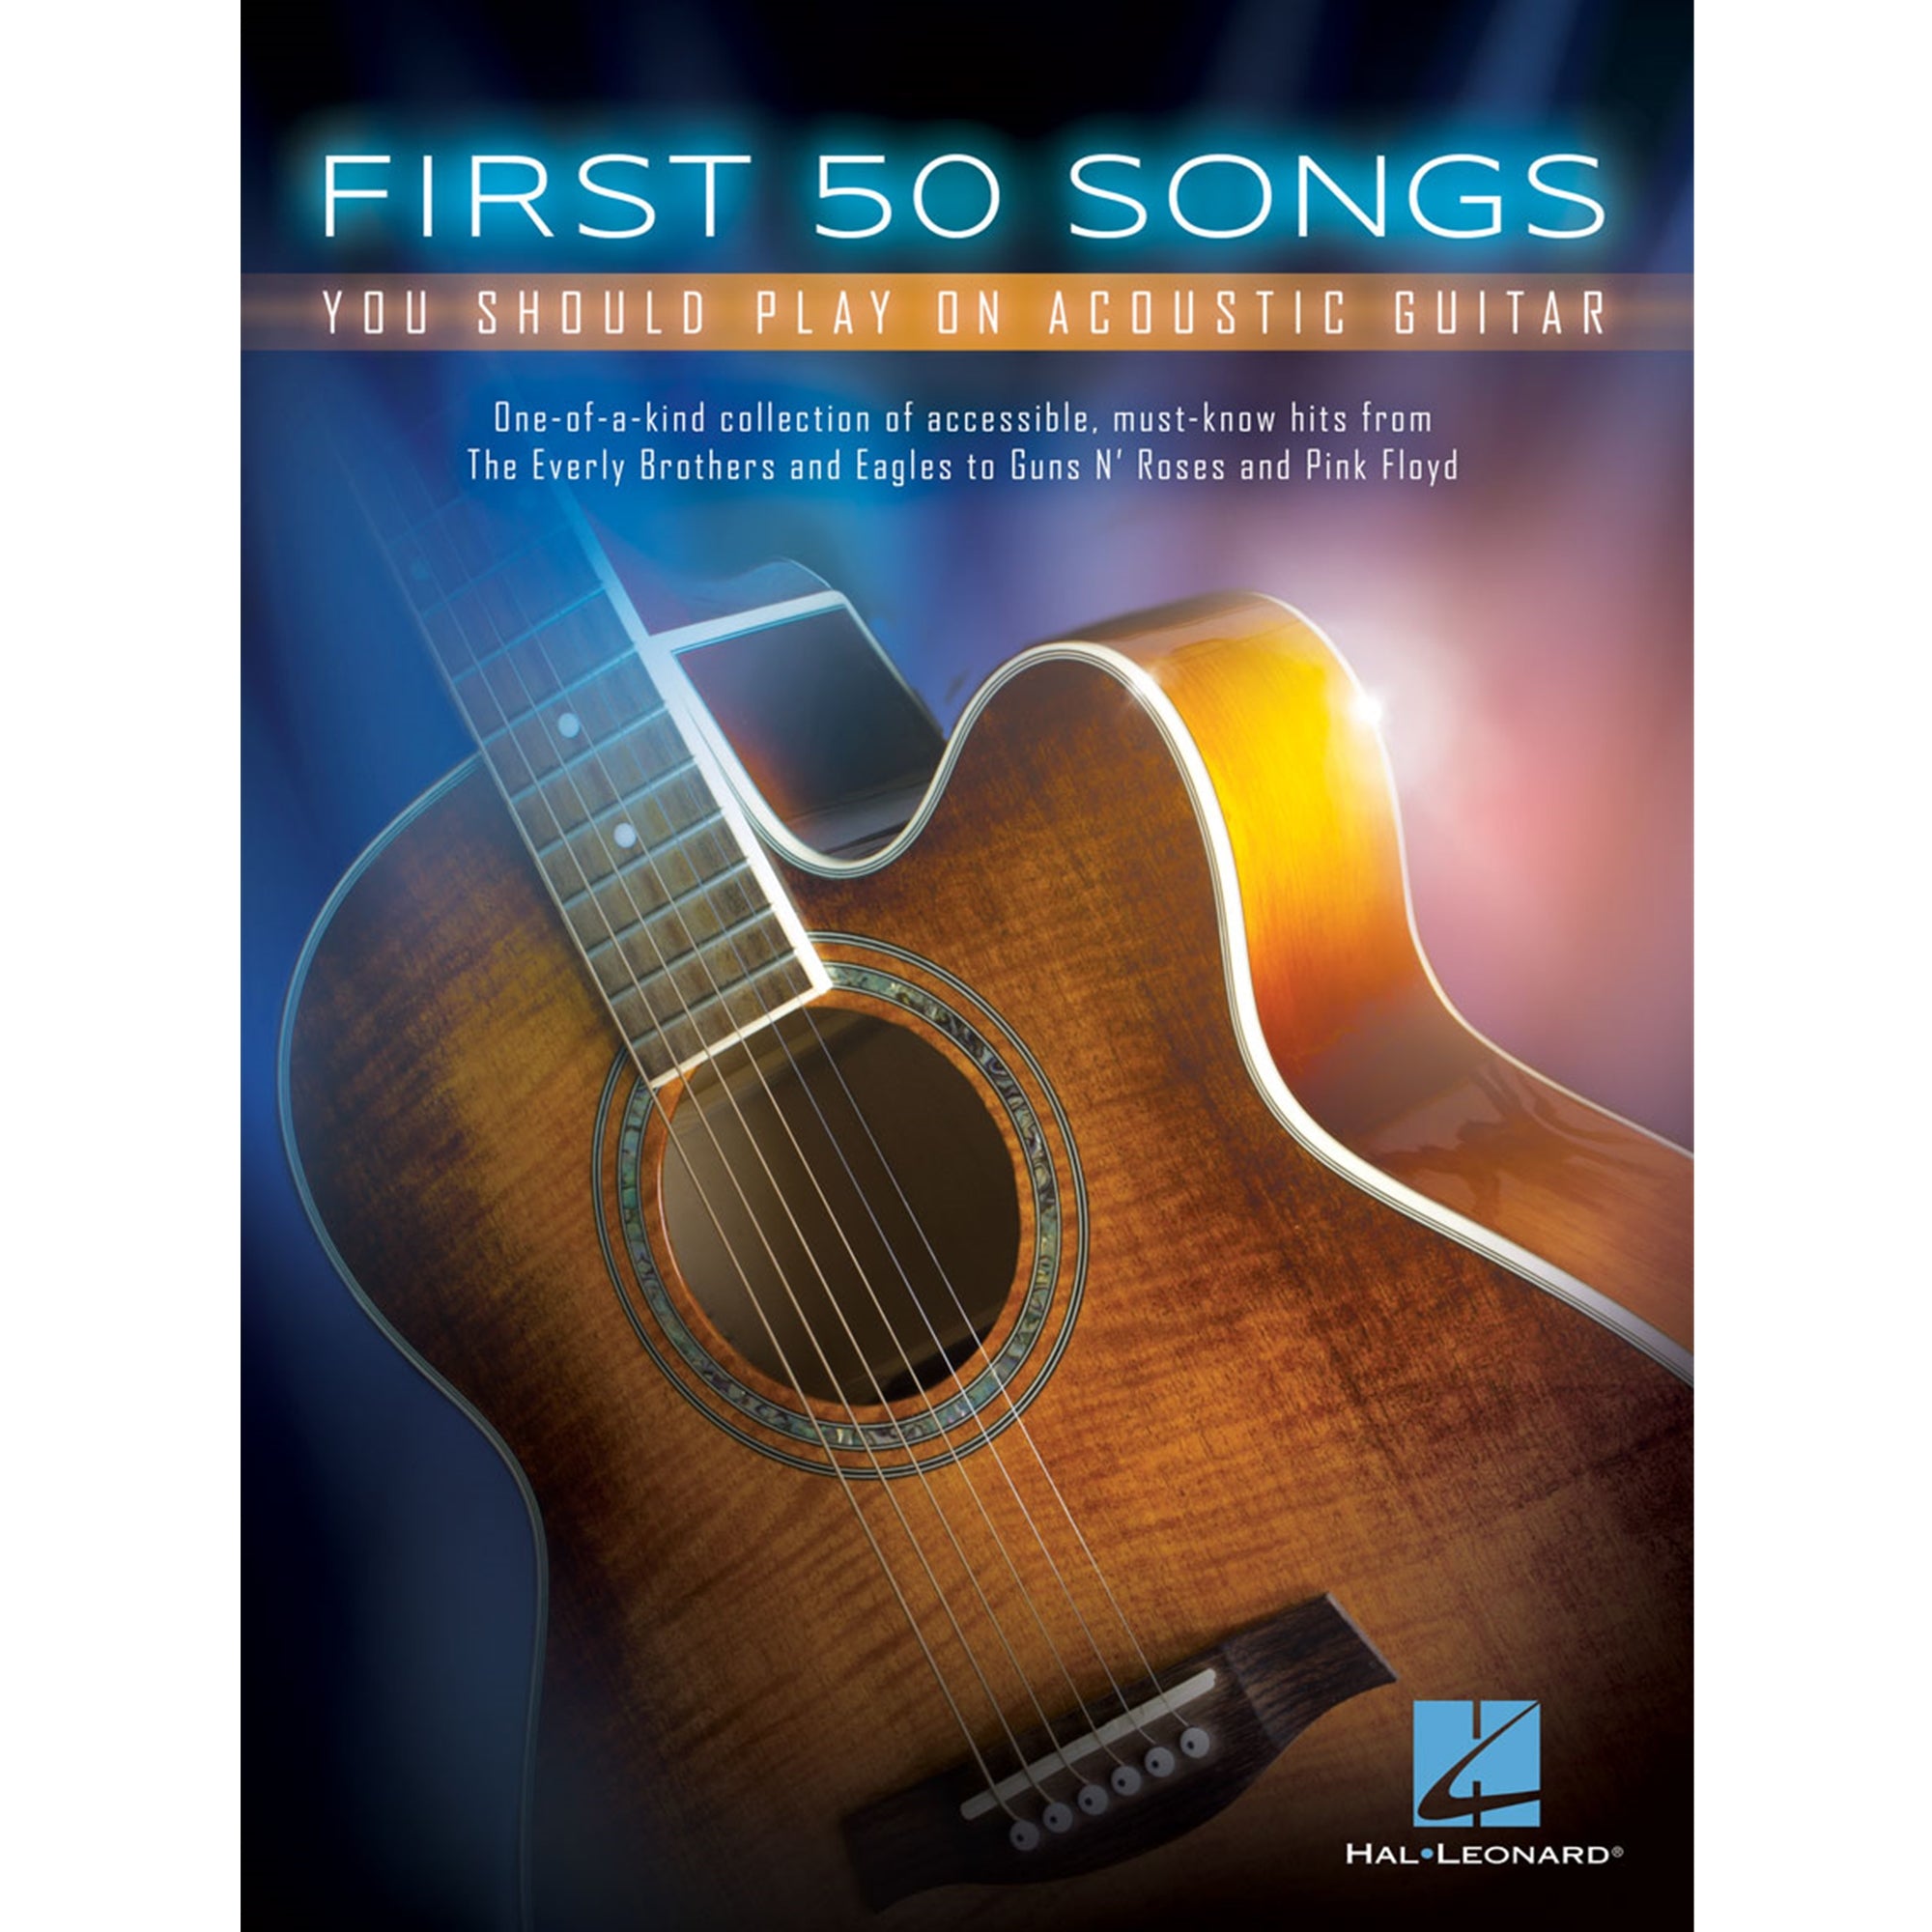 HAL LEONARD 131209 First 50 Songs You Should Play on Acoustic Guitar